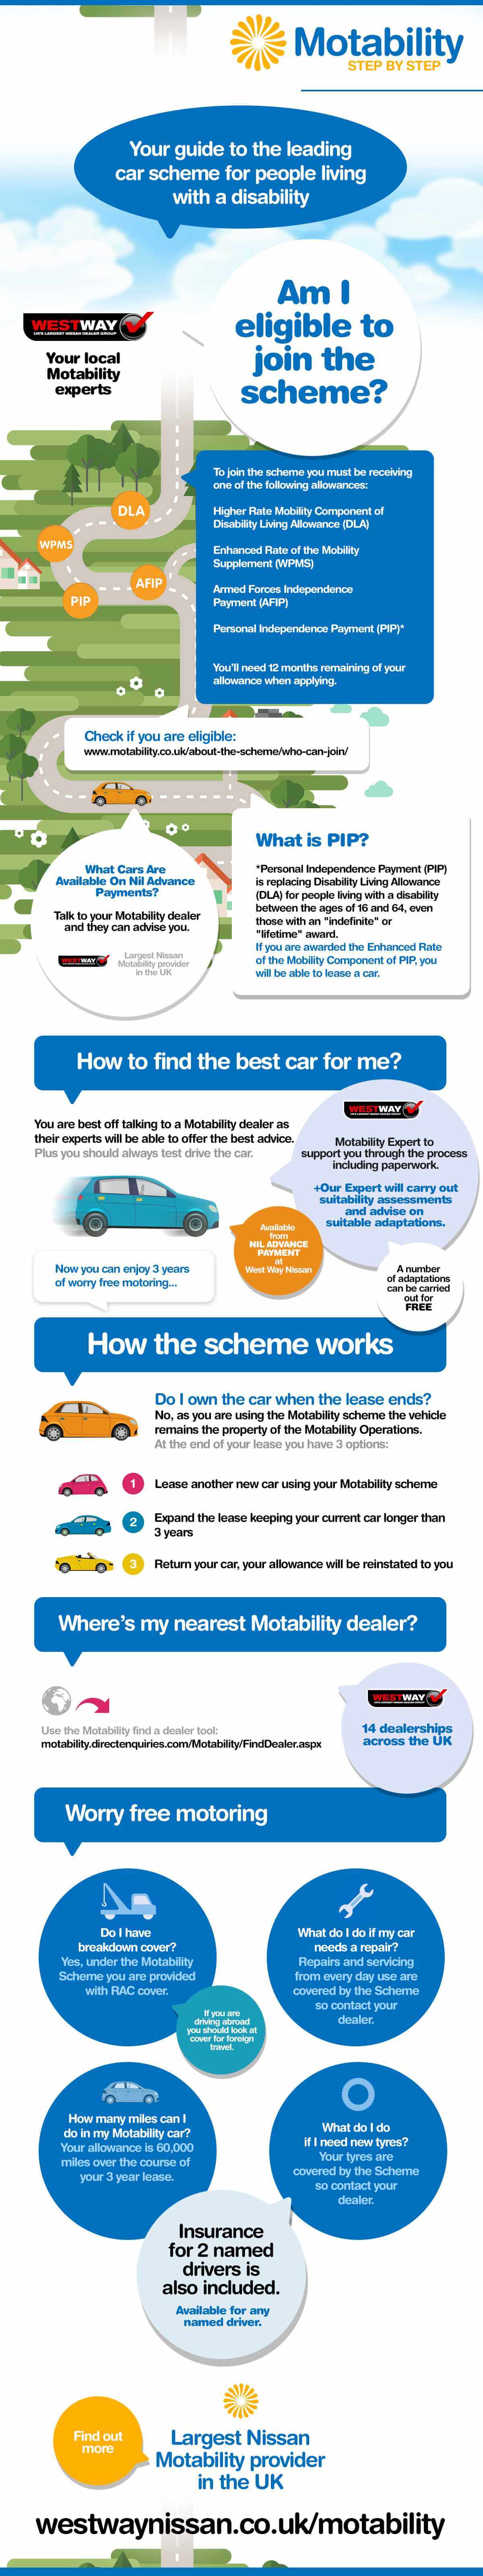 Guide To The Motability Scheme Infographic